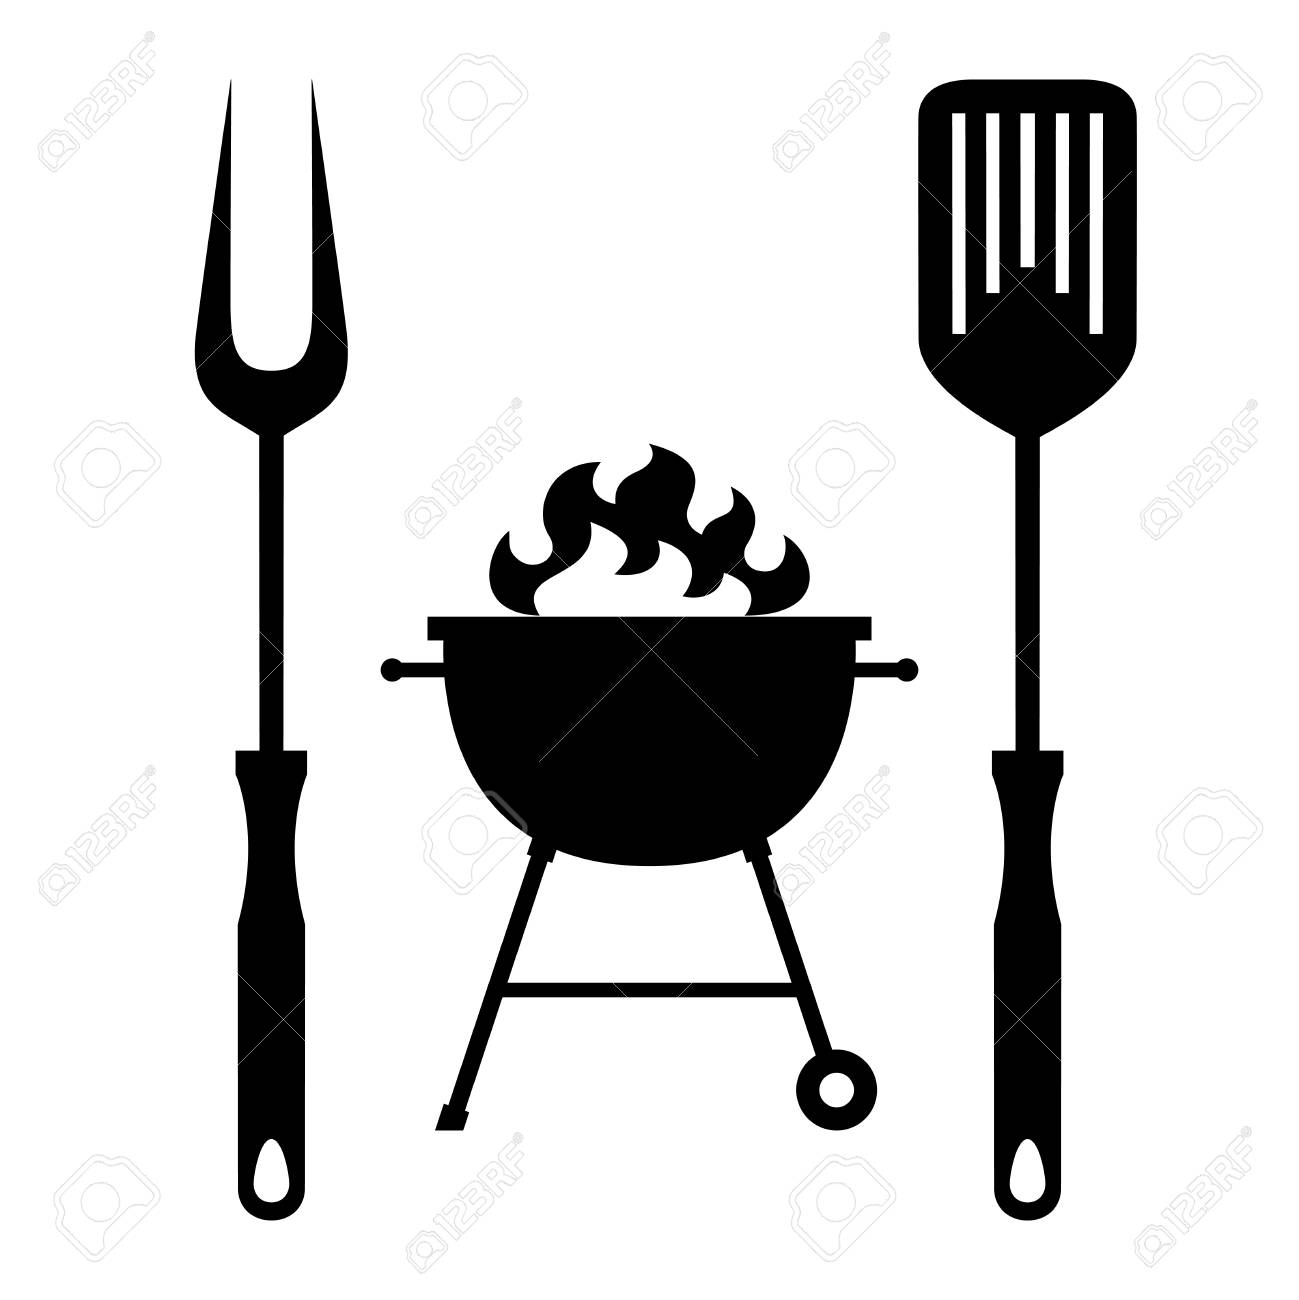 BBQ or grill tools icon in flat design. Sign barbecue tools and...